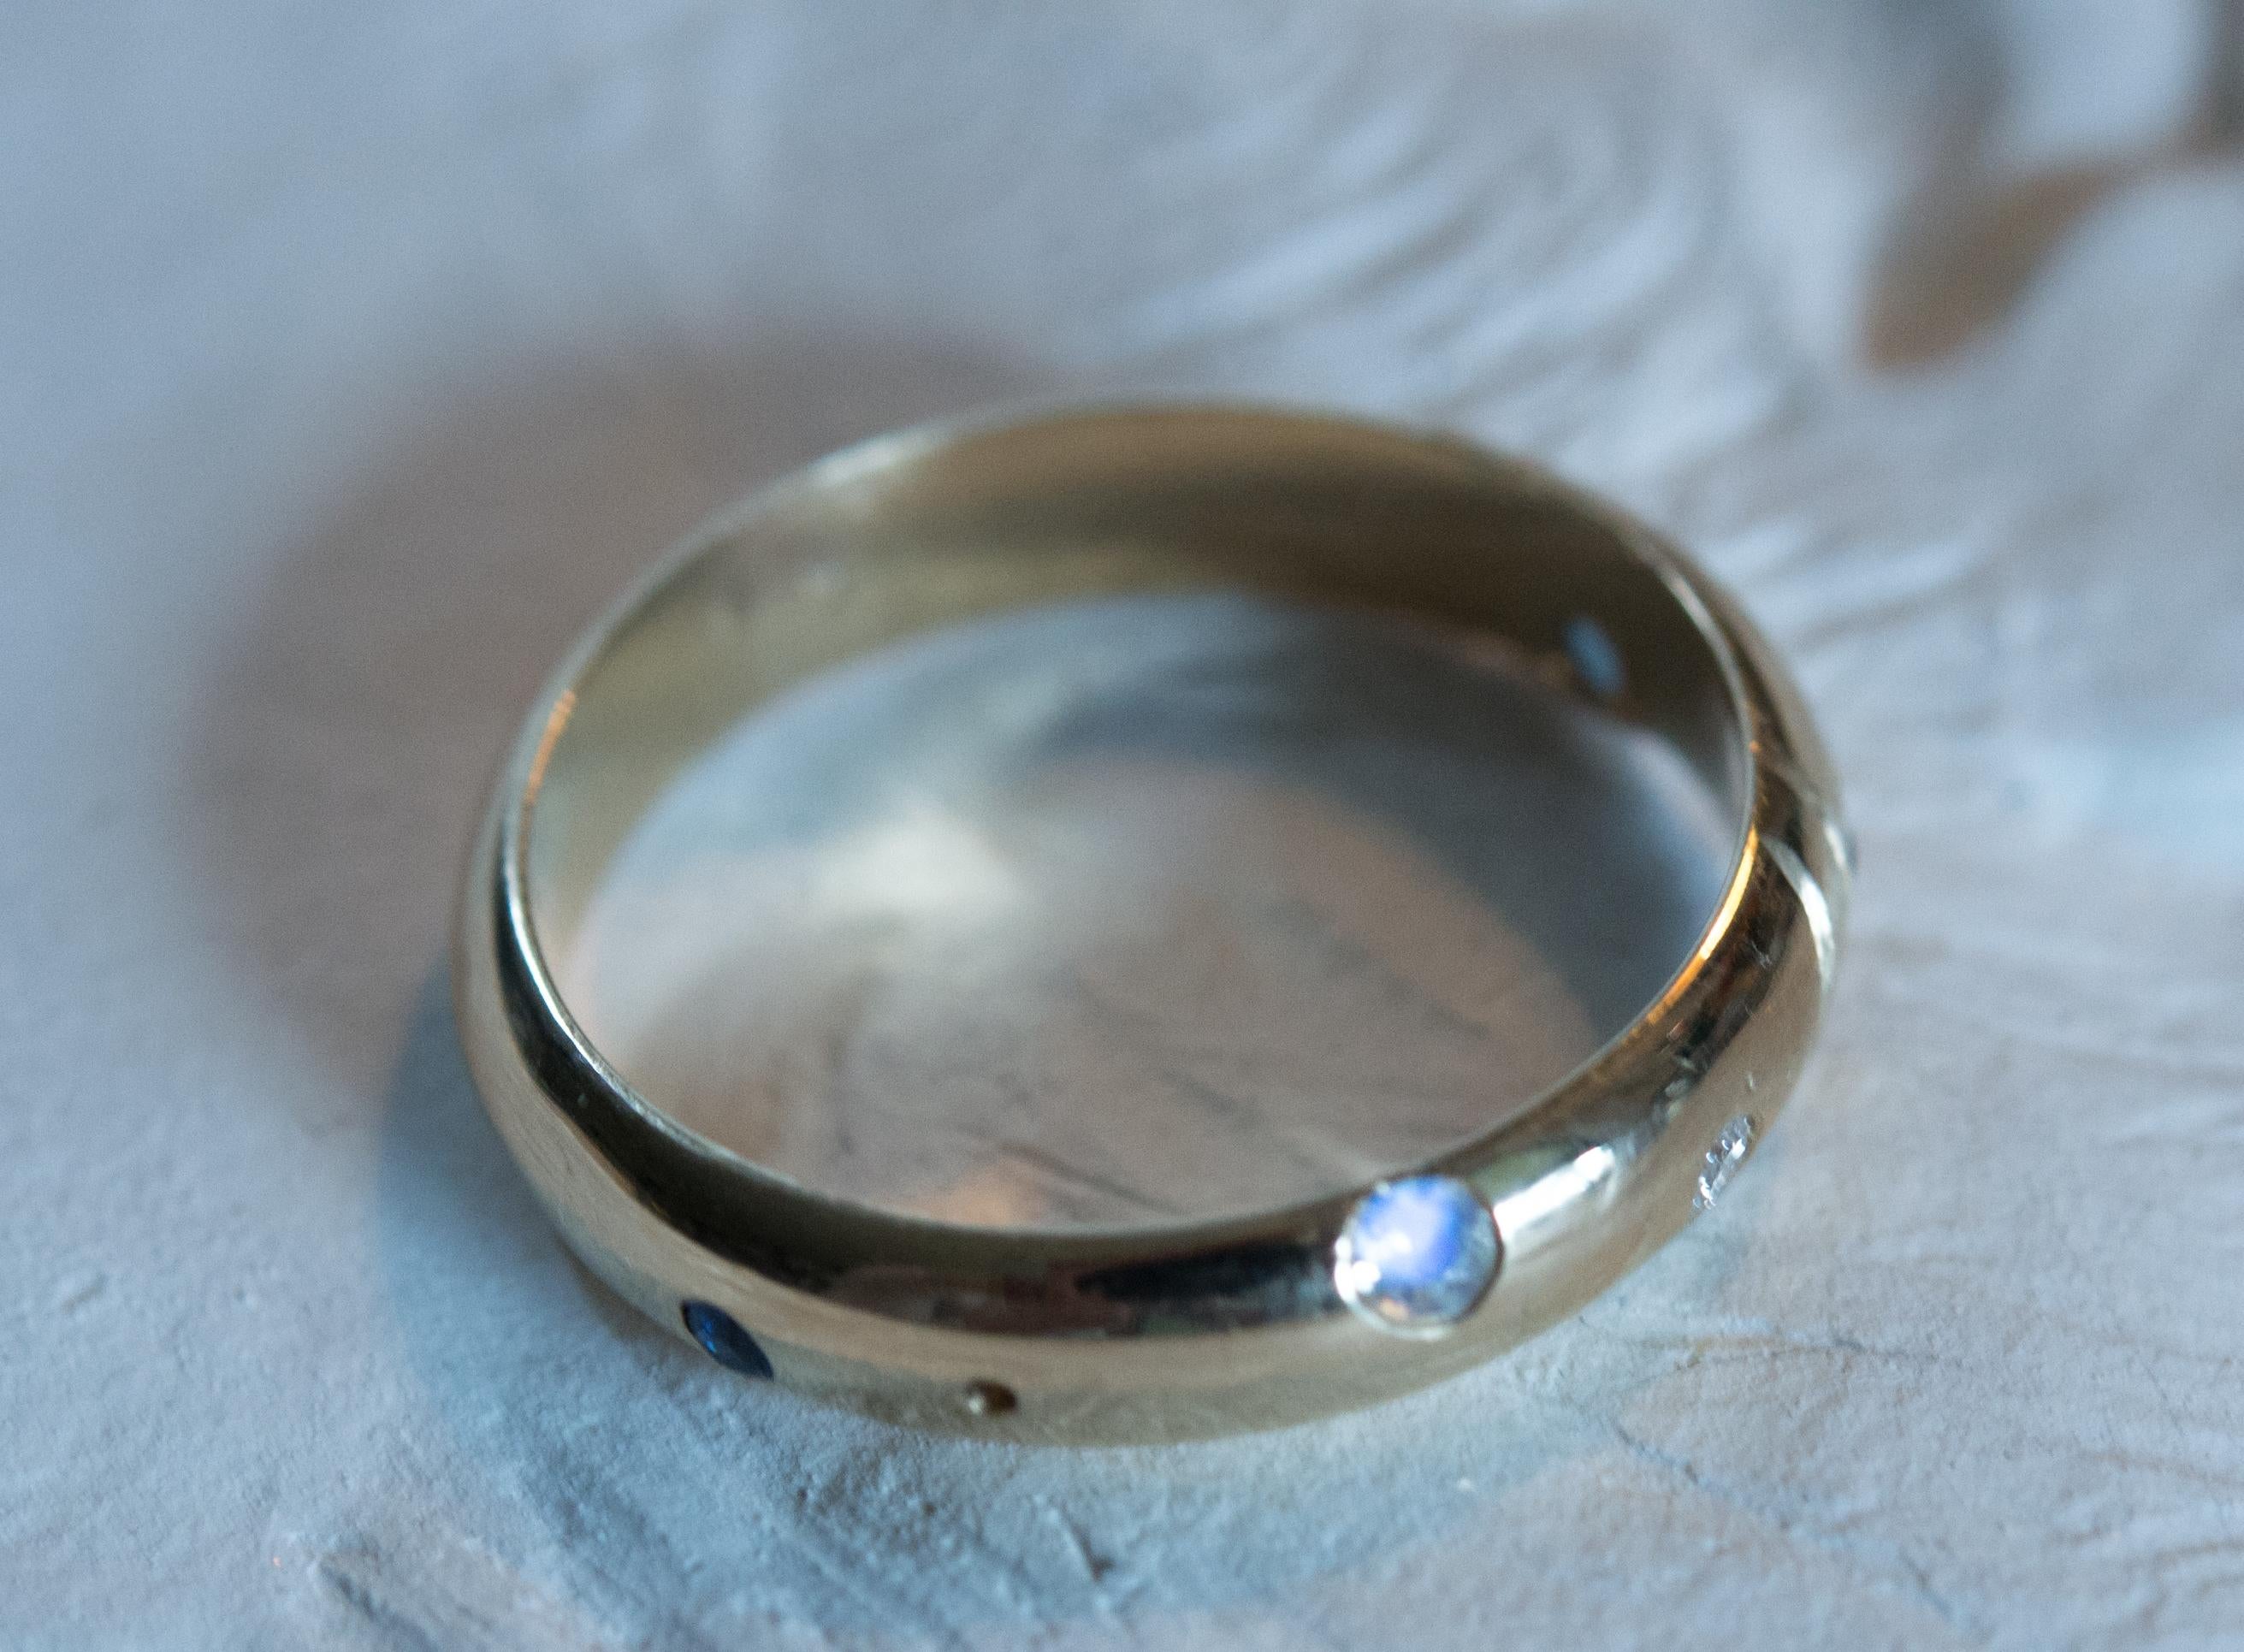 Love Me Twice (as much)
meet your one of a kind repurposed Georgian (circa 1890)
14k gold wedding band. The story behind the Love me
twice (as much) bands are: imagine a post war city in ruin
and rubble, the possibility of love even there, even in